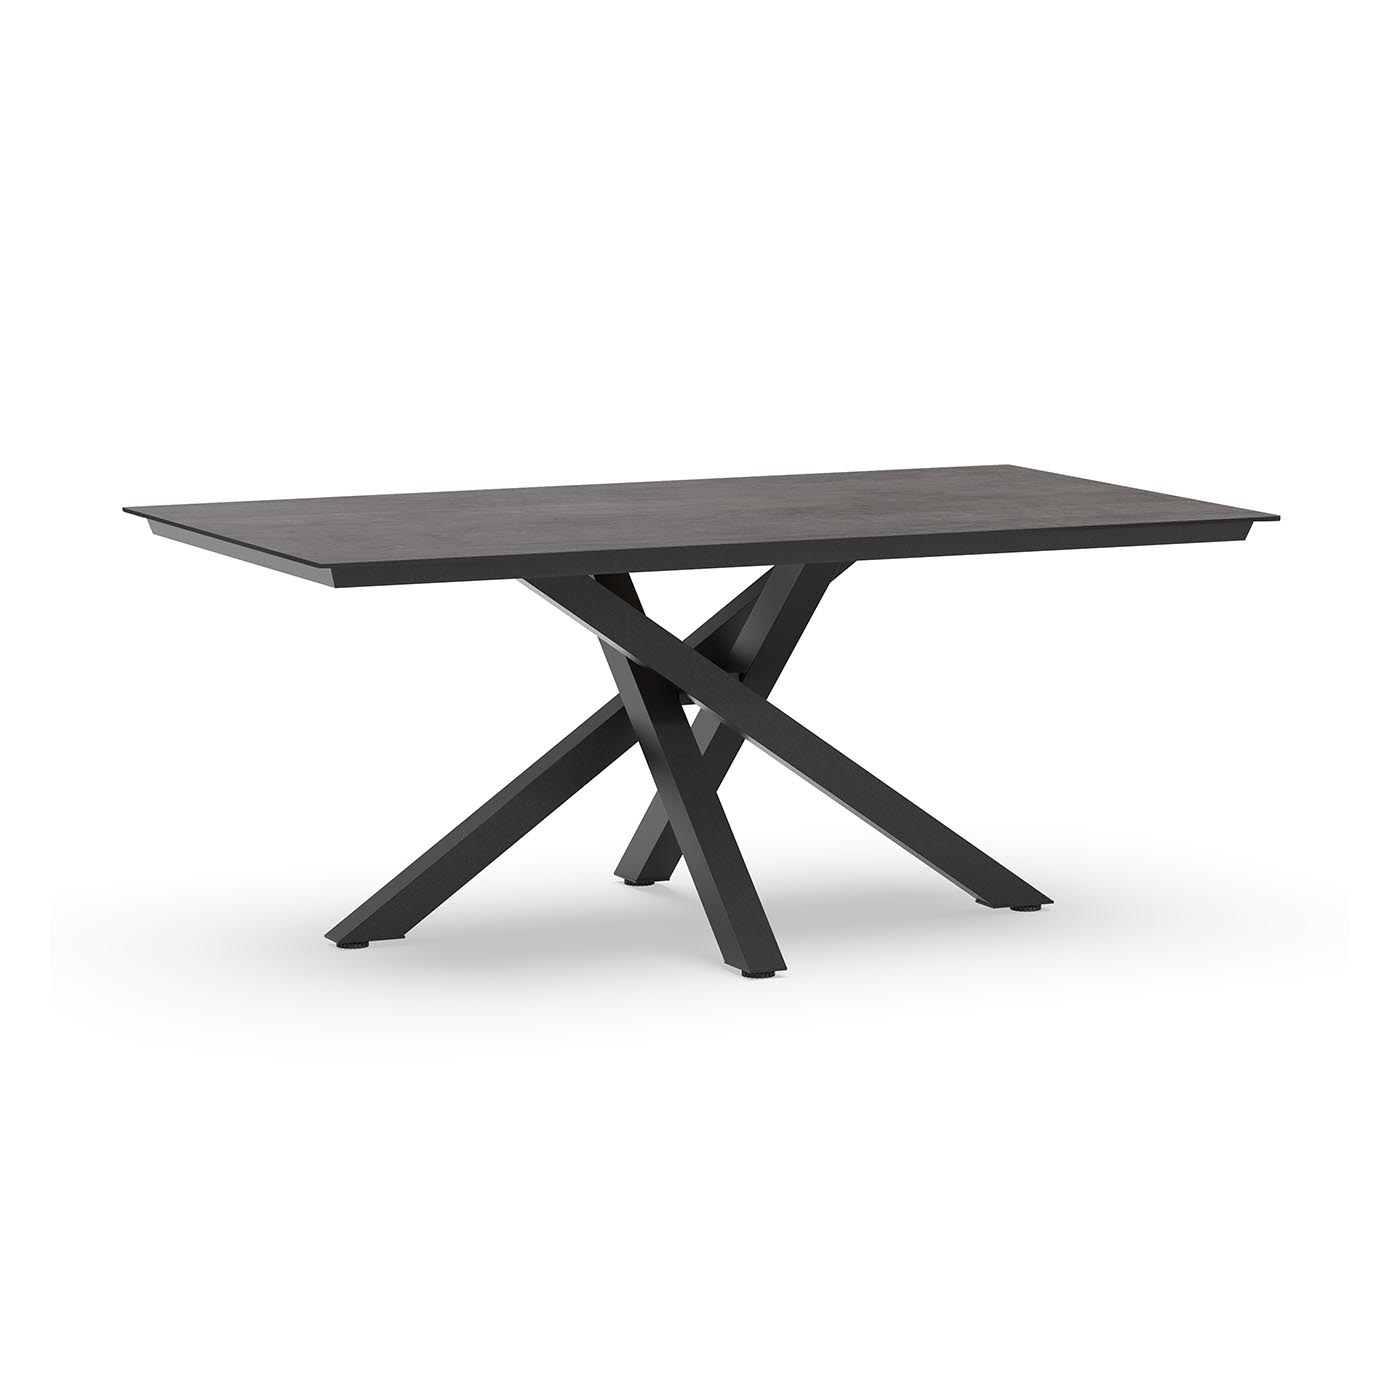 Orion Dining Table Trespa Forest Grey 180 x 100 cm Charcoal